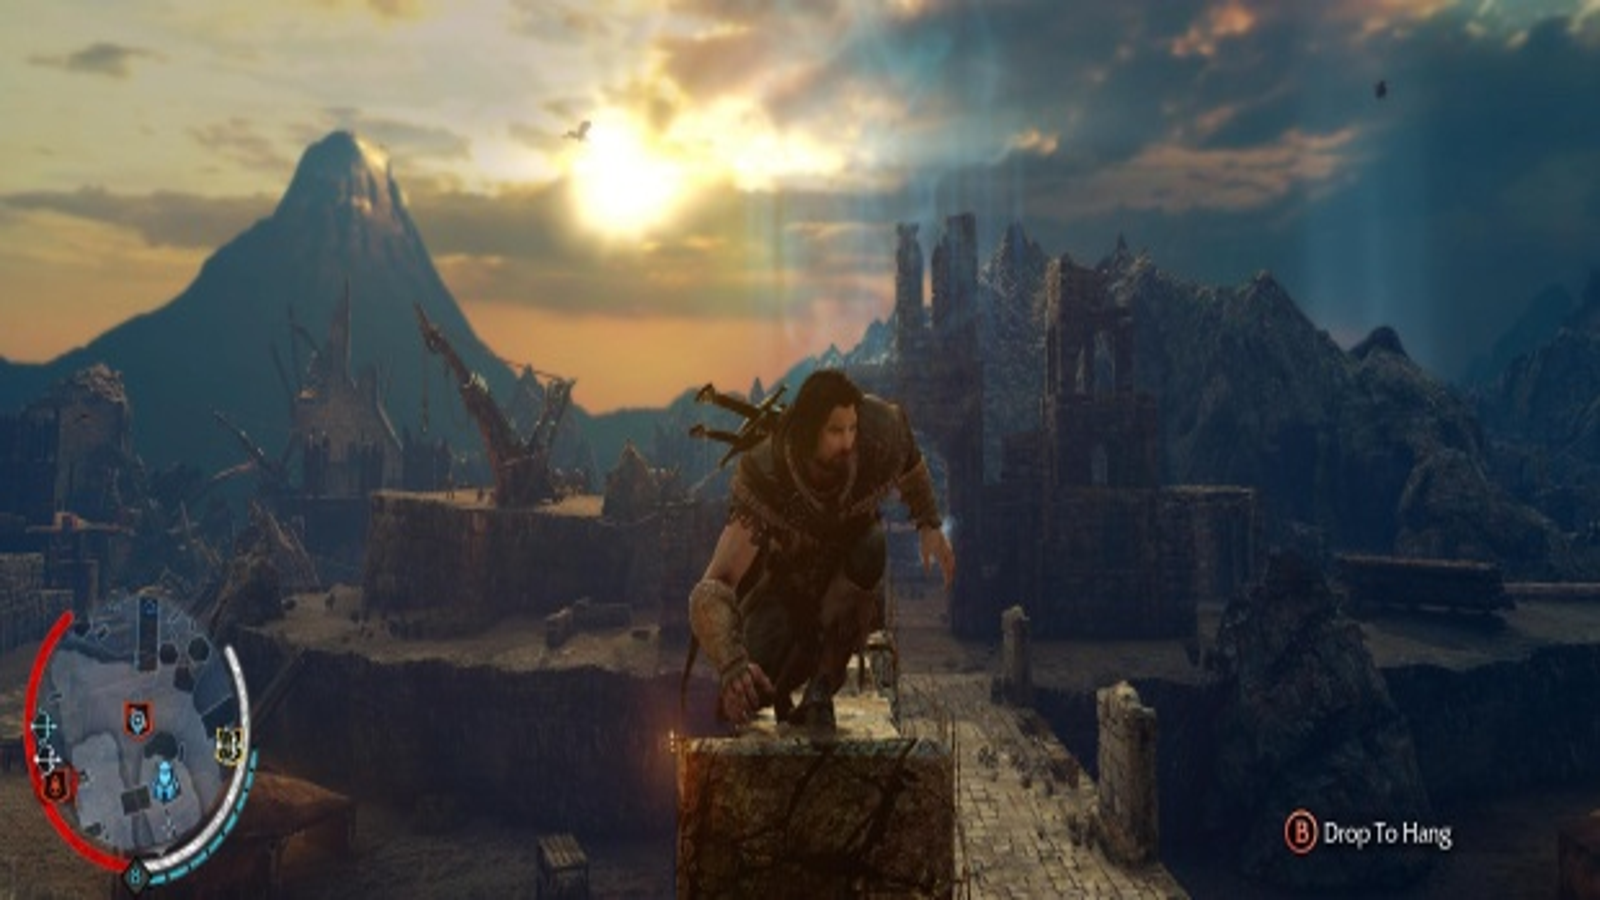 Middle-earth: Shadow of Mordor – Review